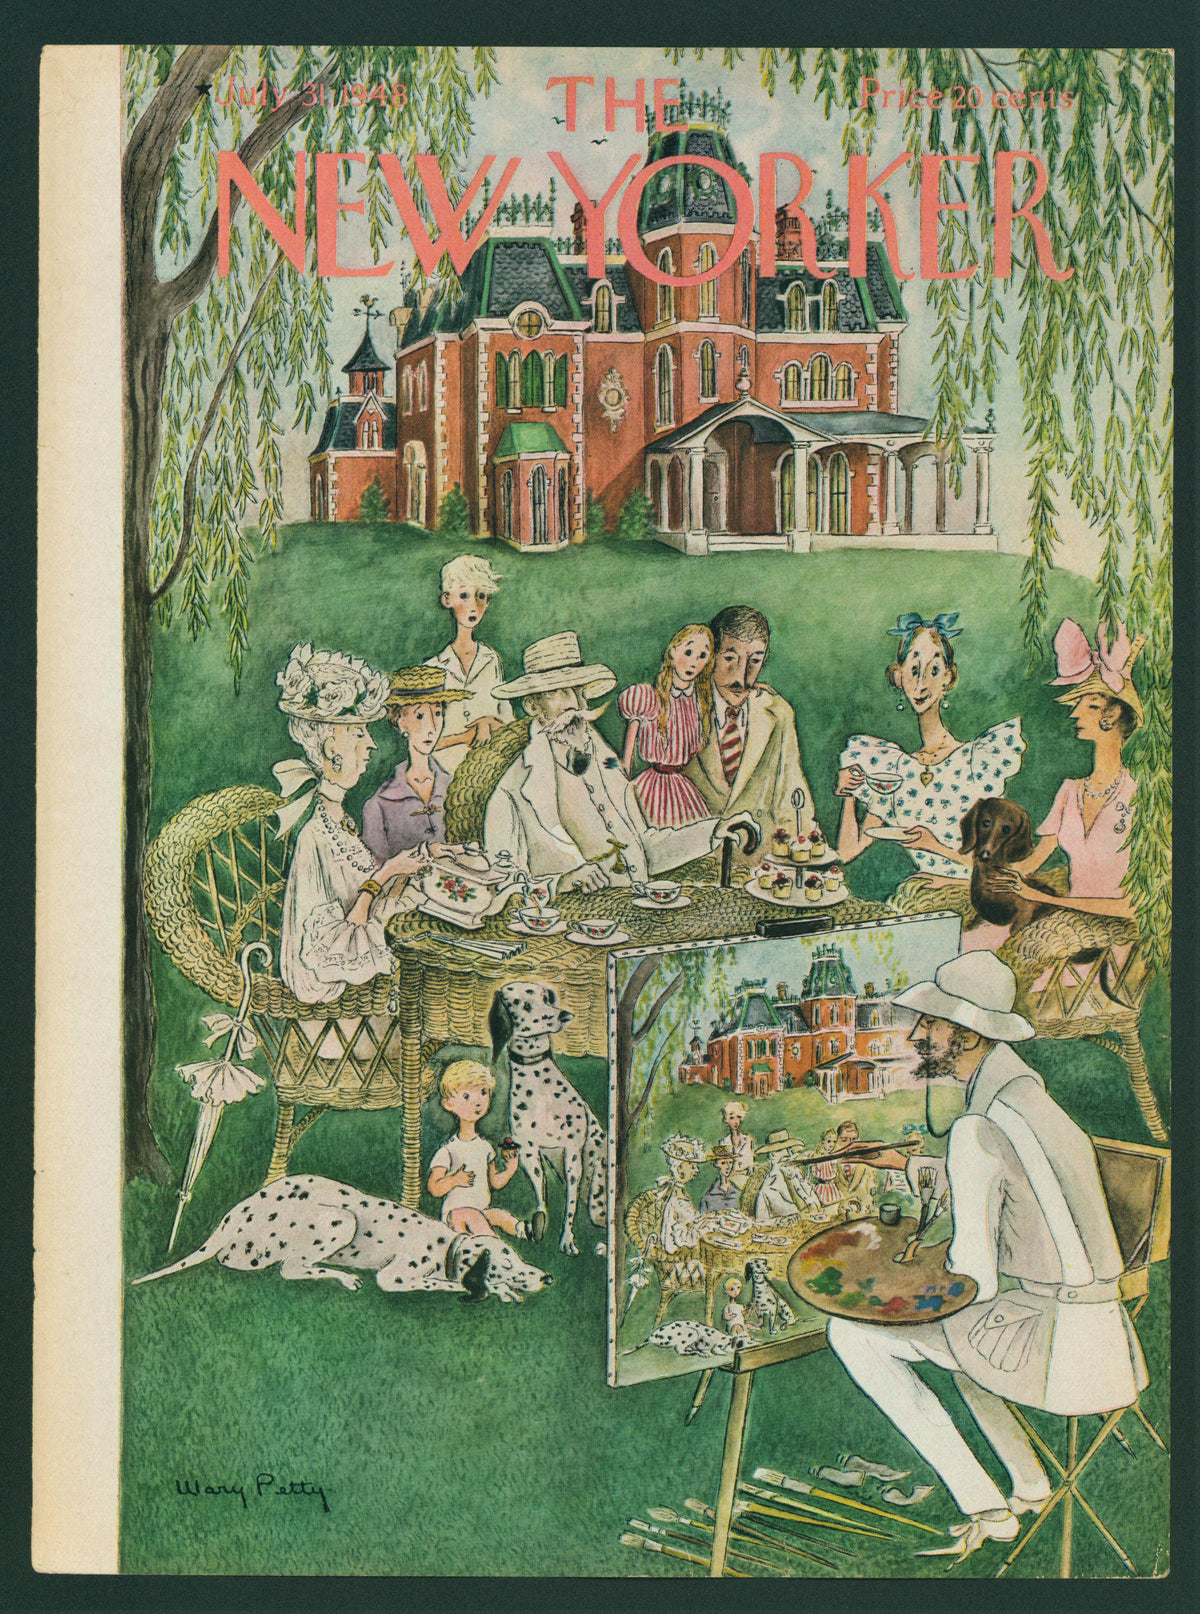 Afternoon Tea- The New Yorker - Authentic Vintage Antique Print